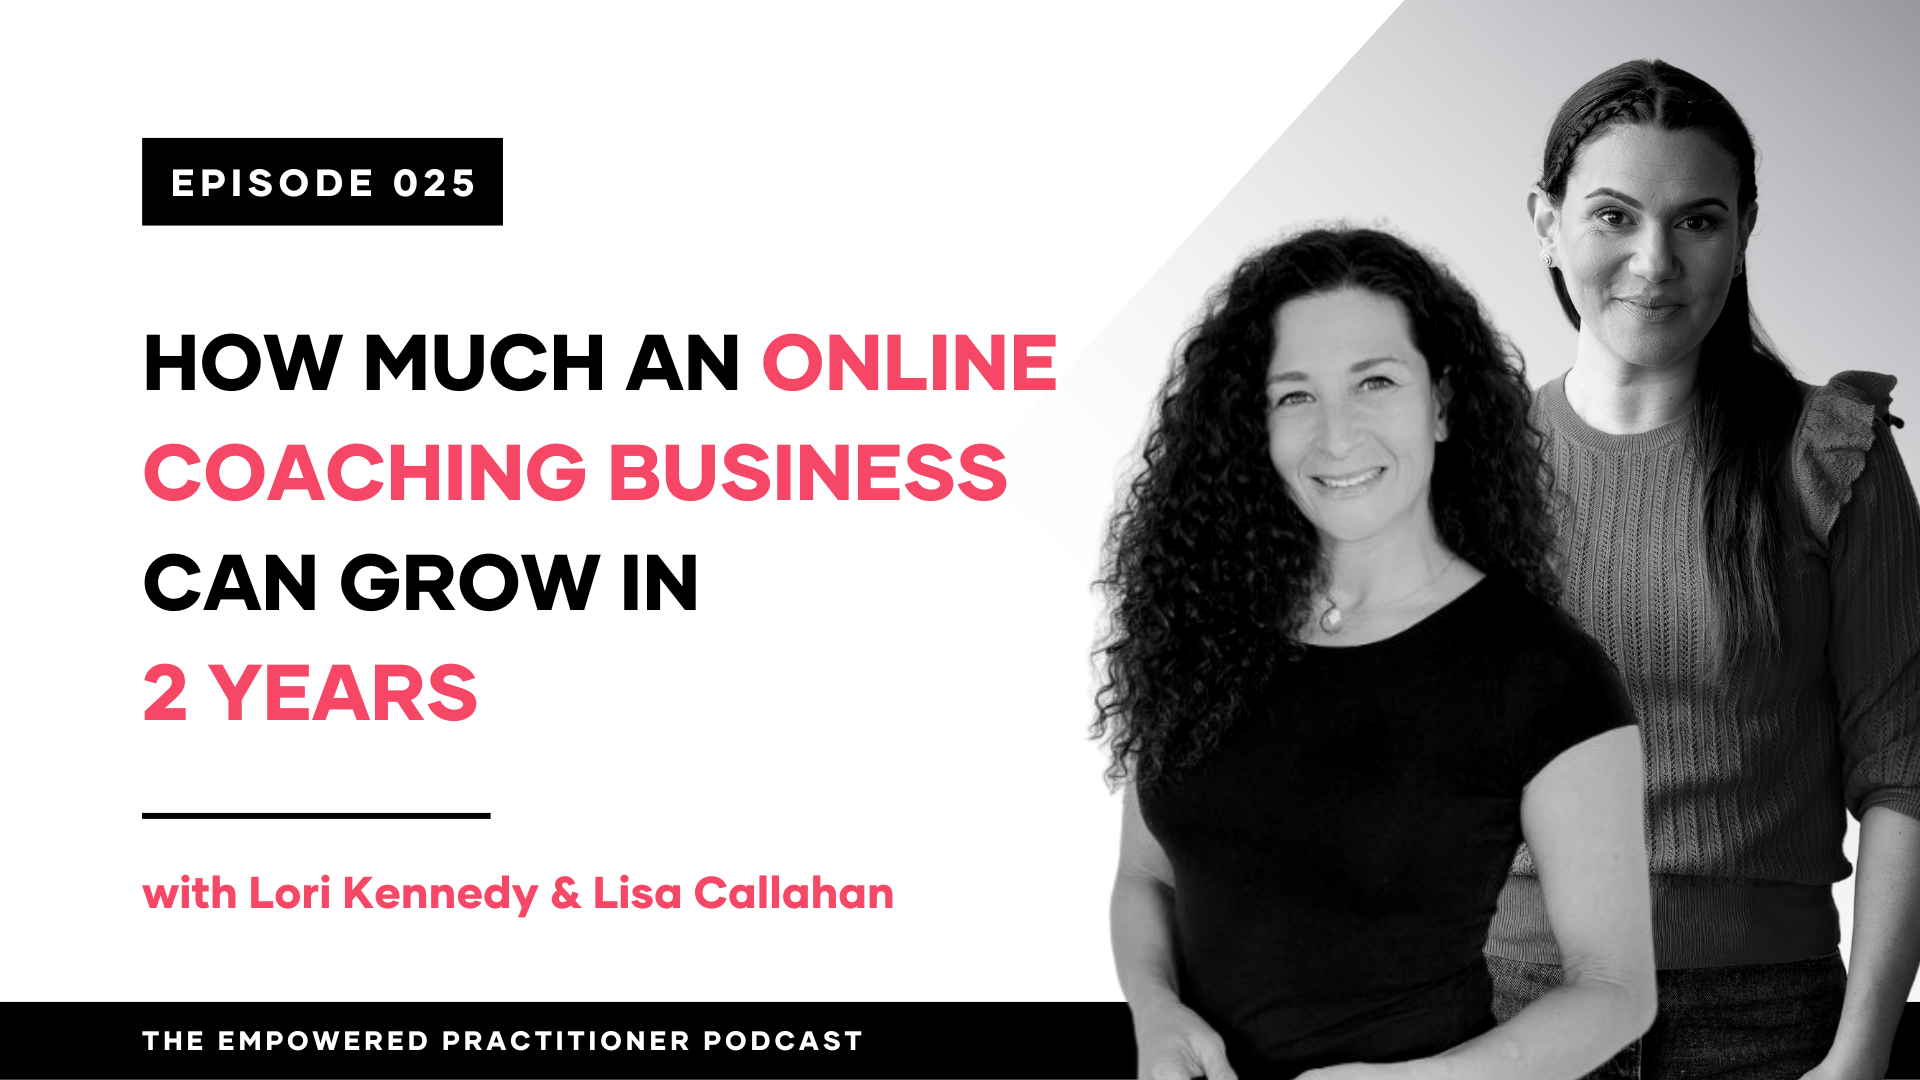 HOW MUCH AN ONLINE COACHING BUSINESS CAN GROW IN TWO YEARS